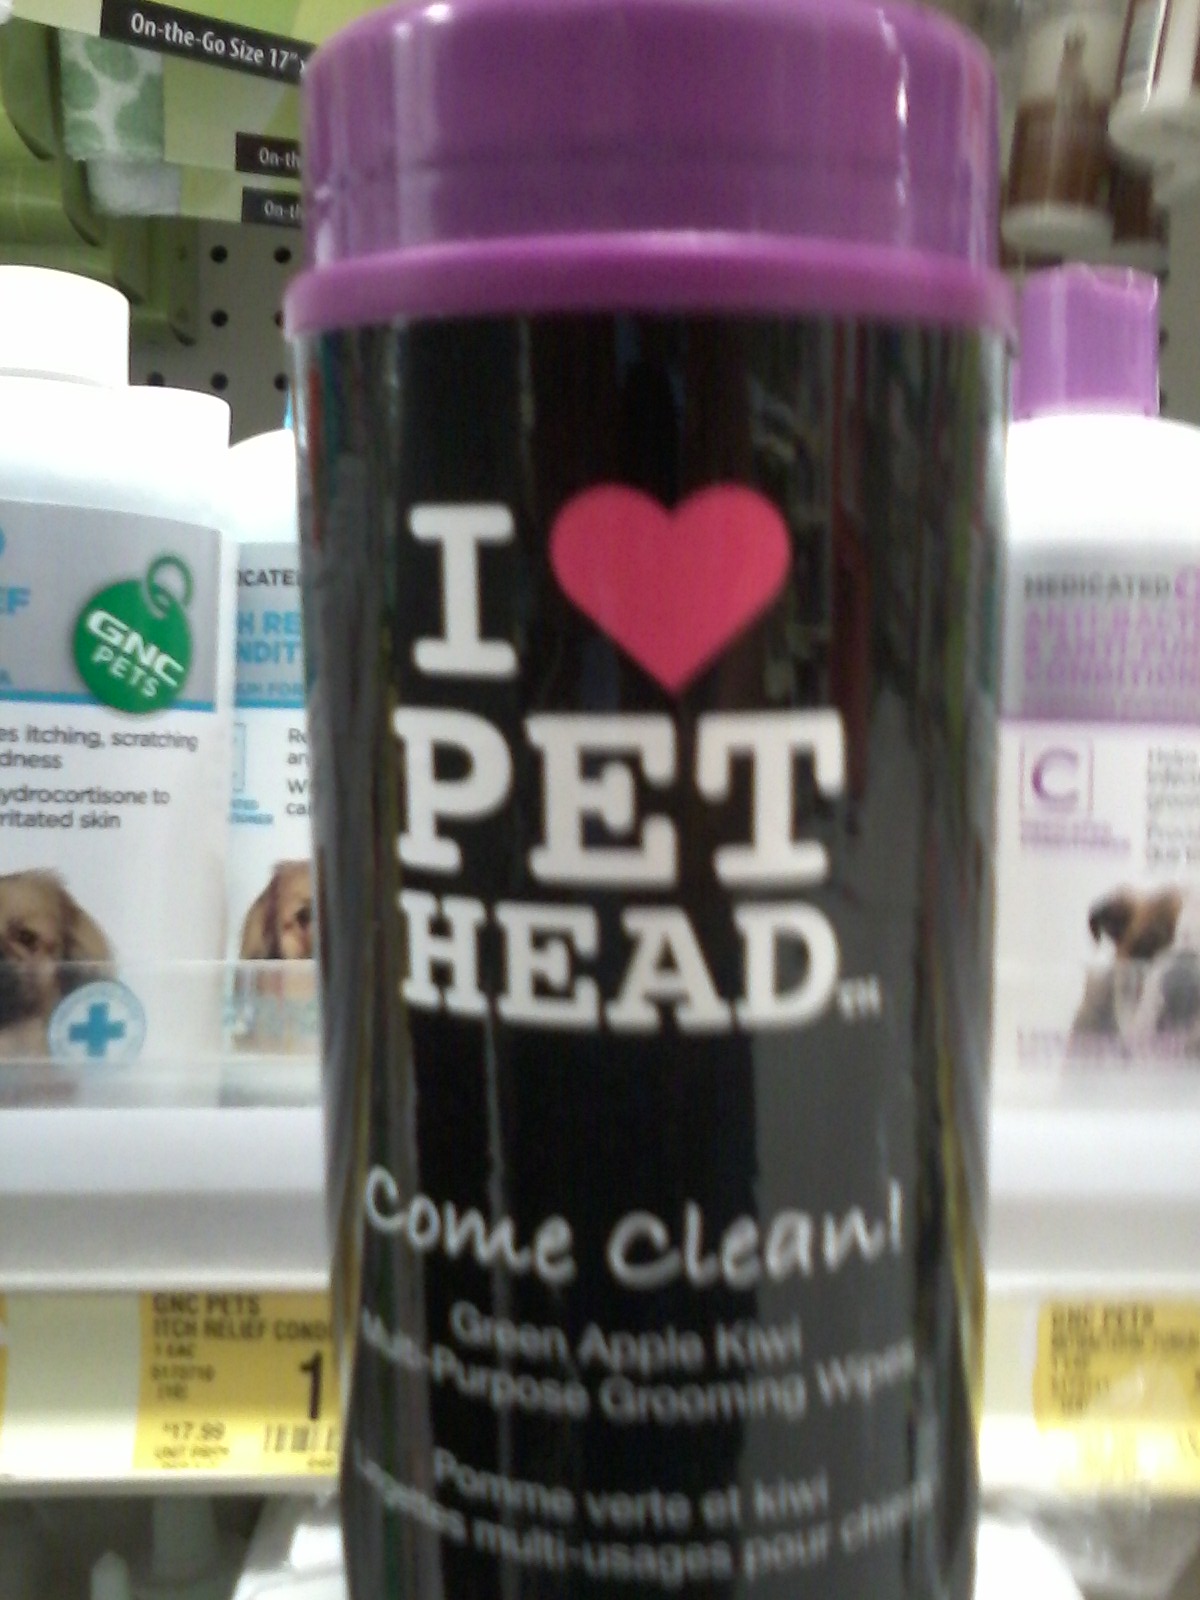 Another freaky Pet care product.